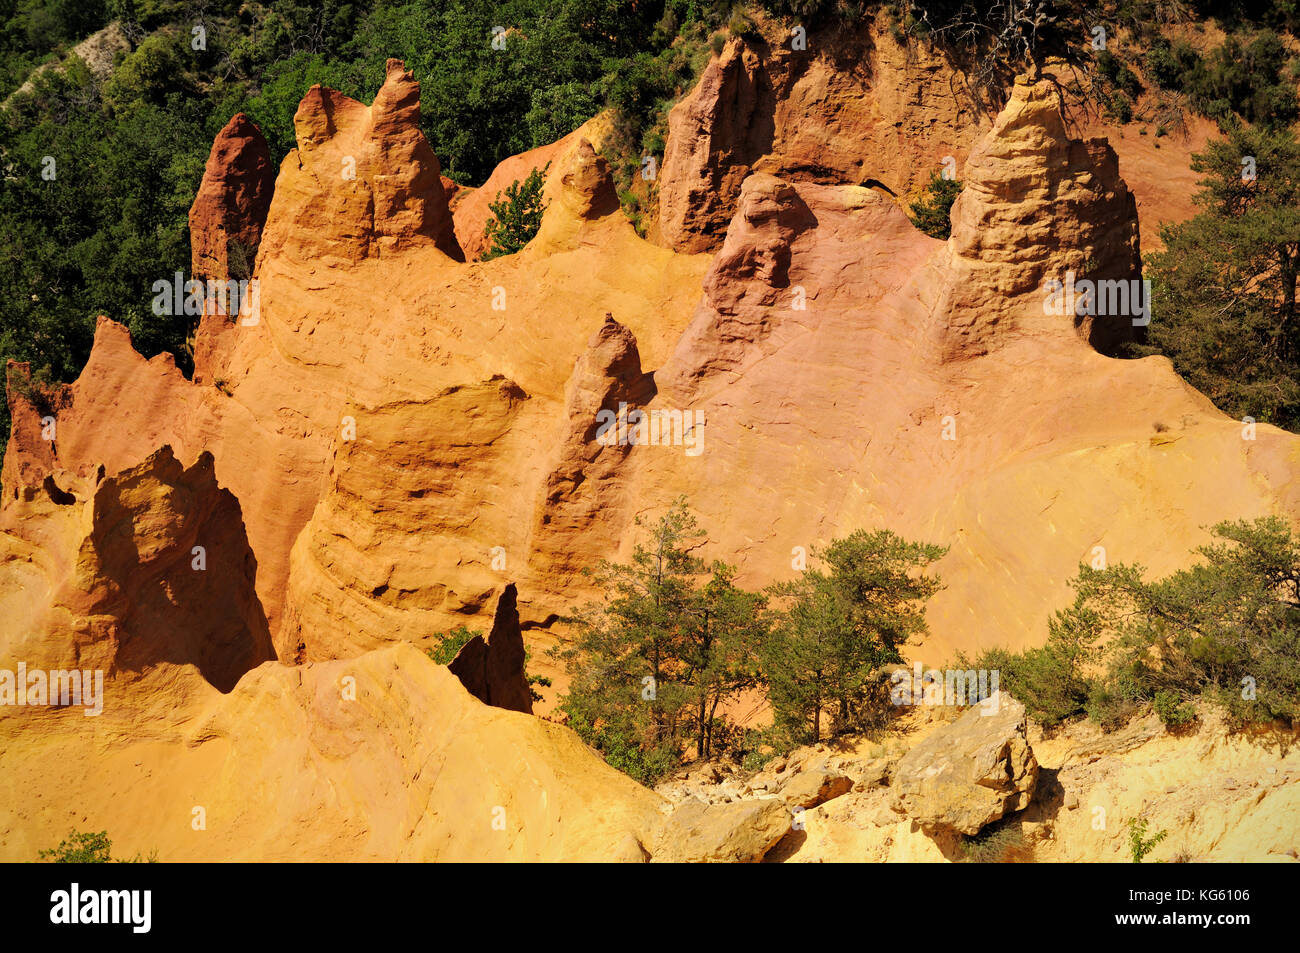 Ochre cliff and trees in Colorado Provencal, Rustrel, Vaucluse, France Stock Photo